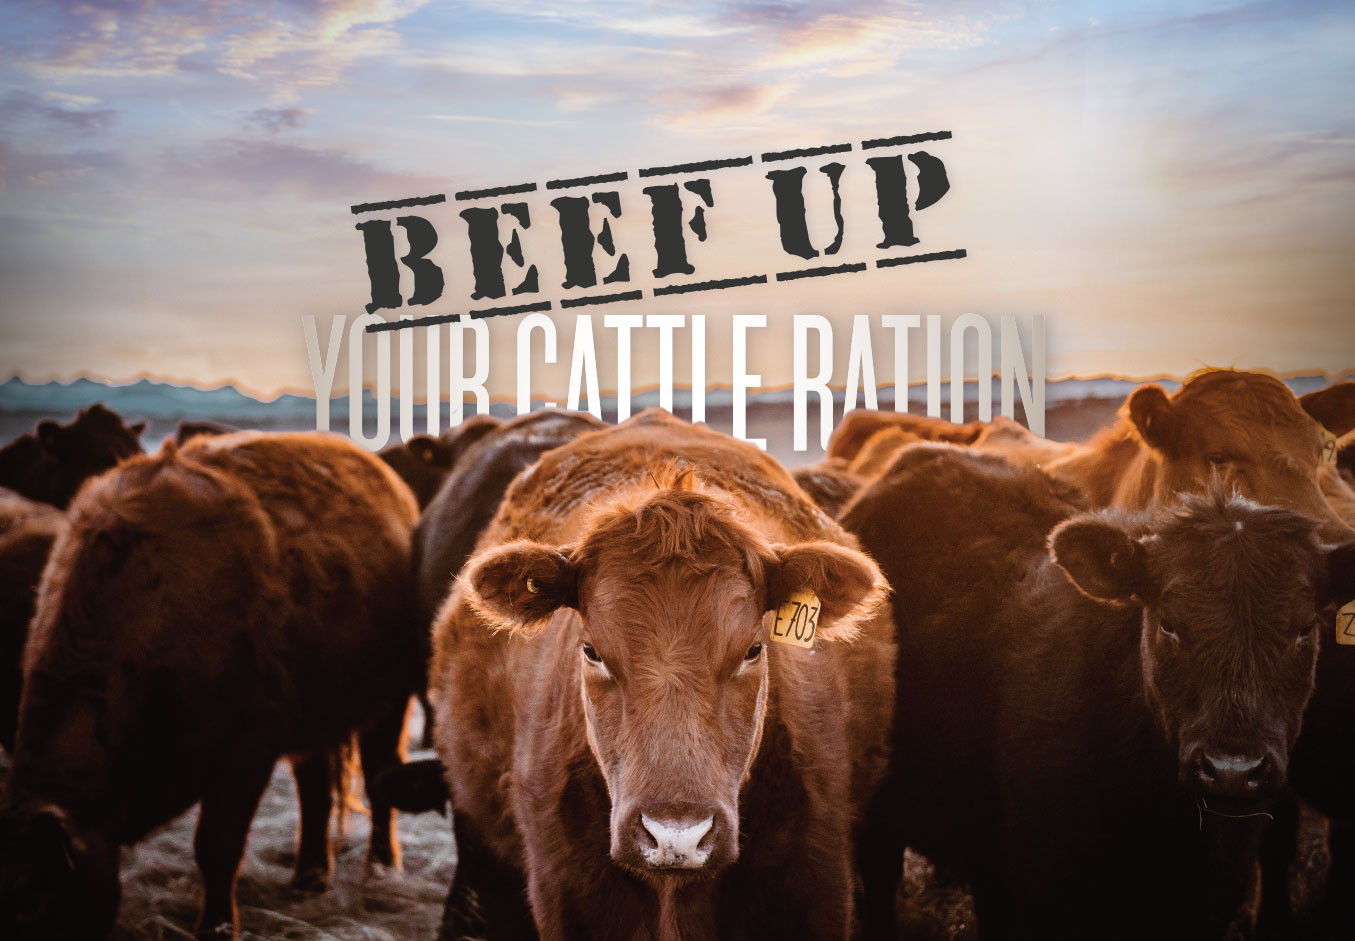 Beef Up Your Cattle Ration